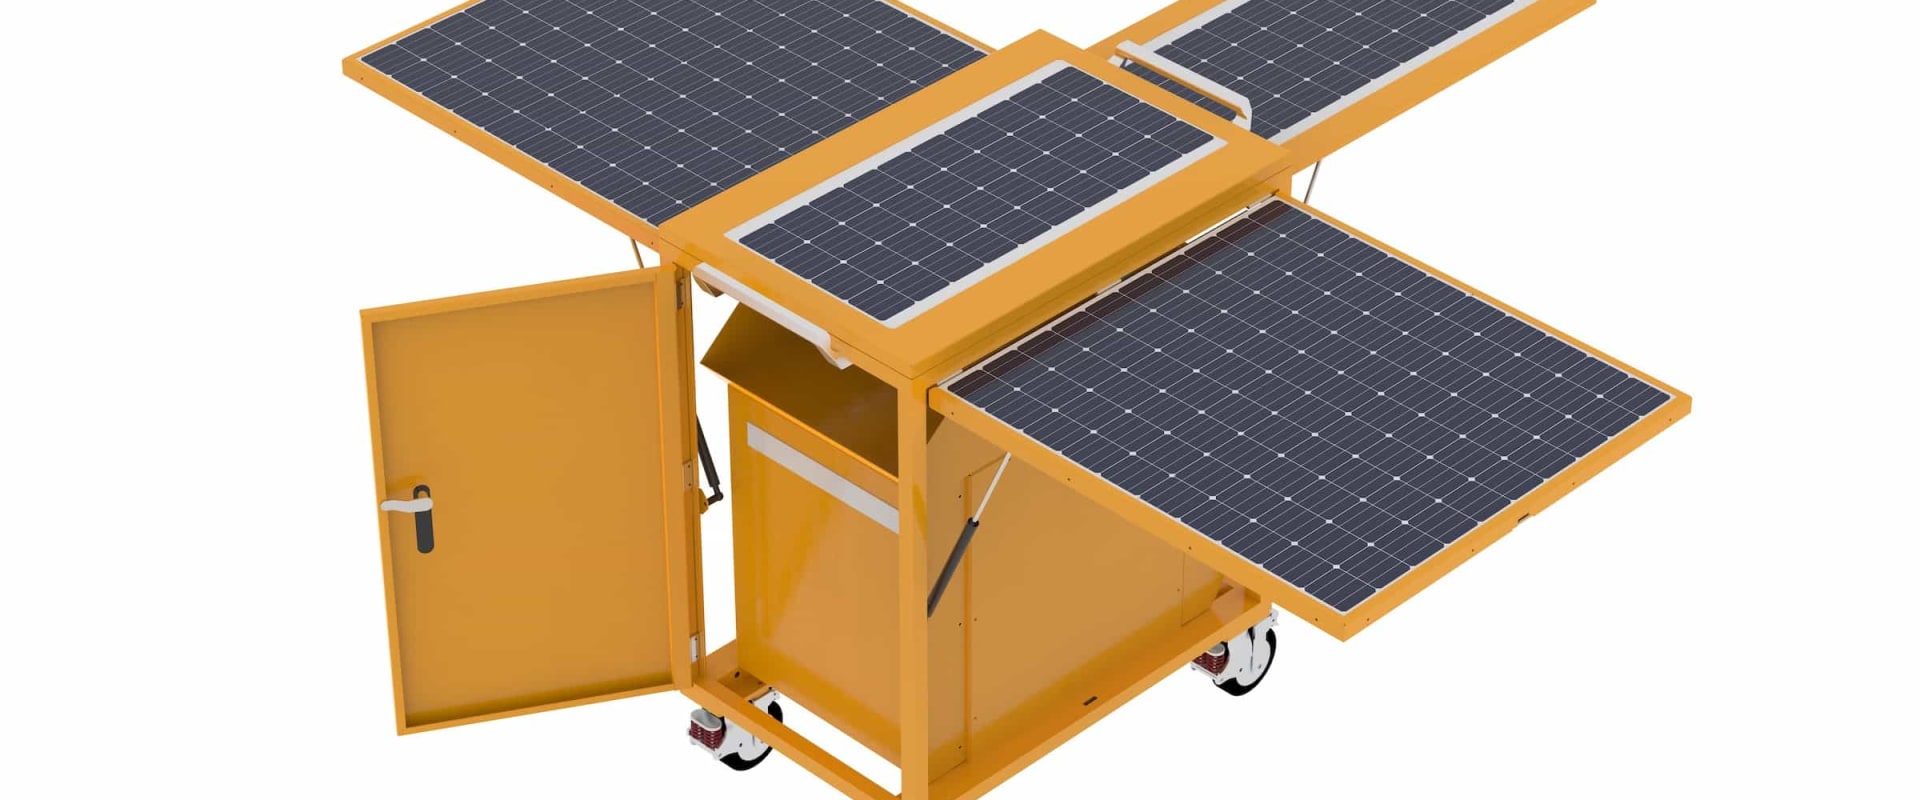 Harness the Power of the Sun: An Introduction to Hybrid Solar Powered Generators